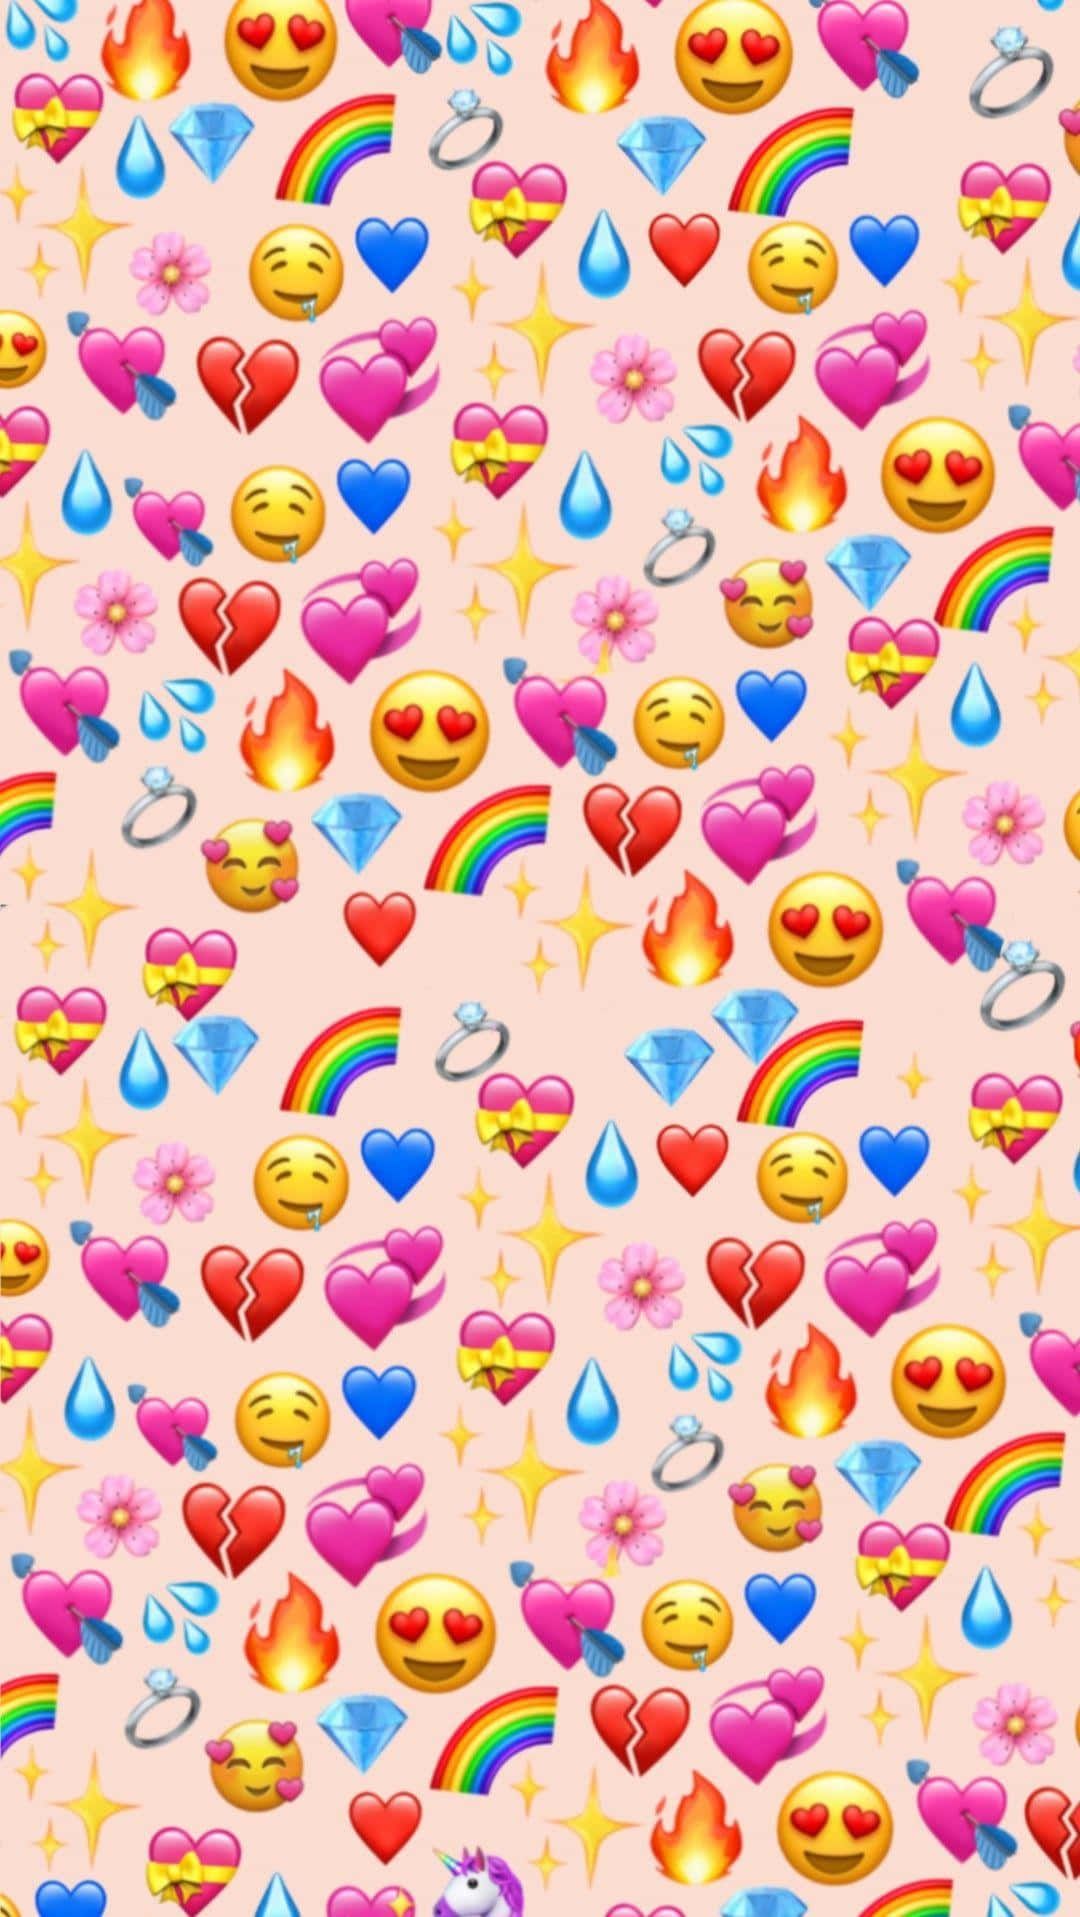 A colorful wallpaper with a lot of emojis. - Emoji